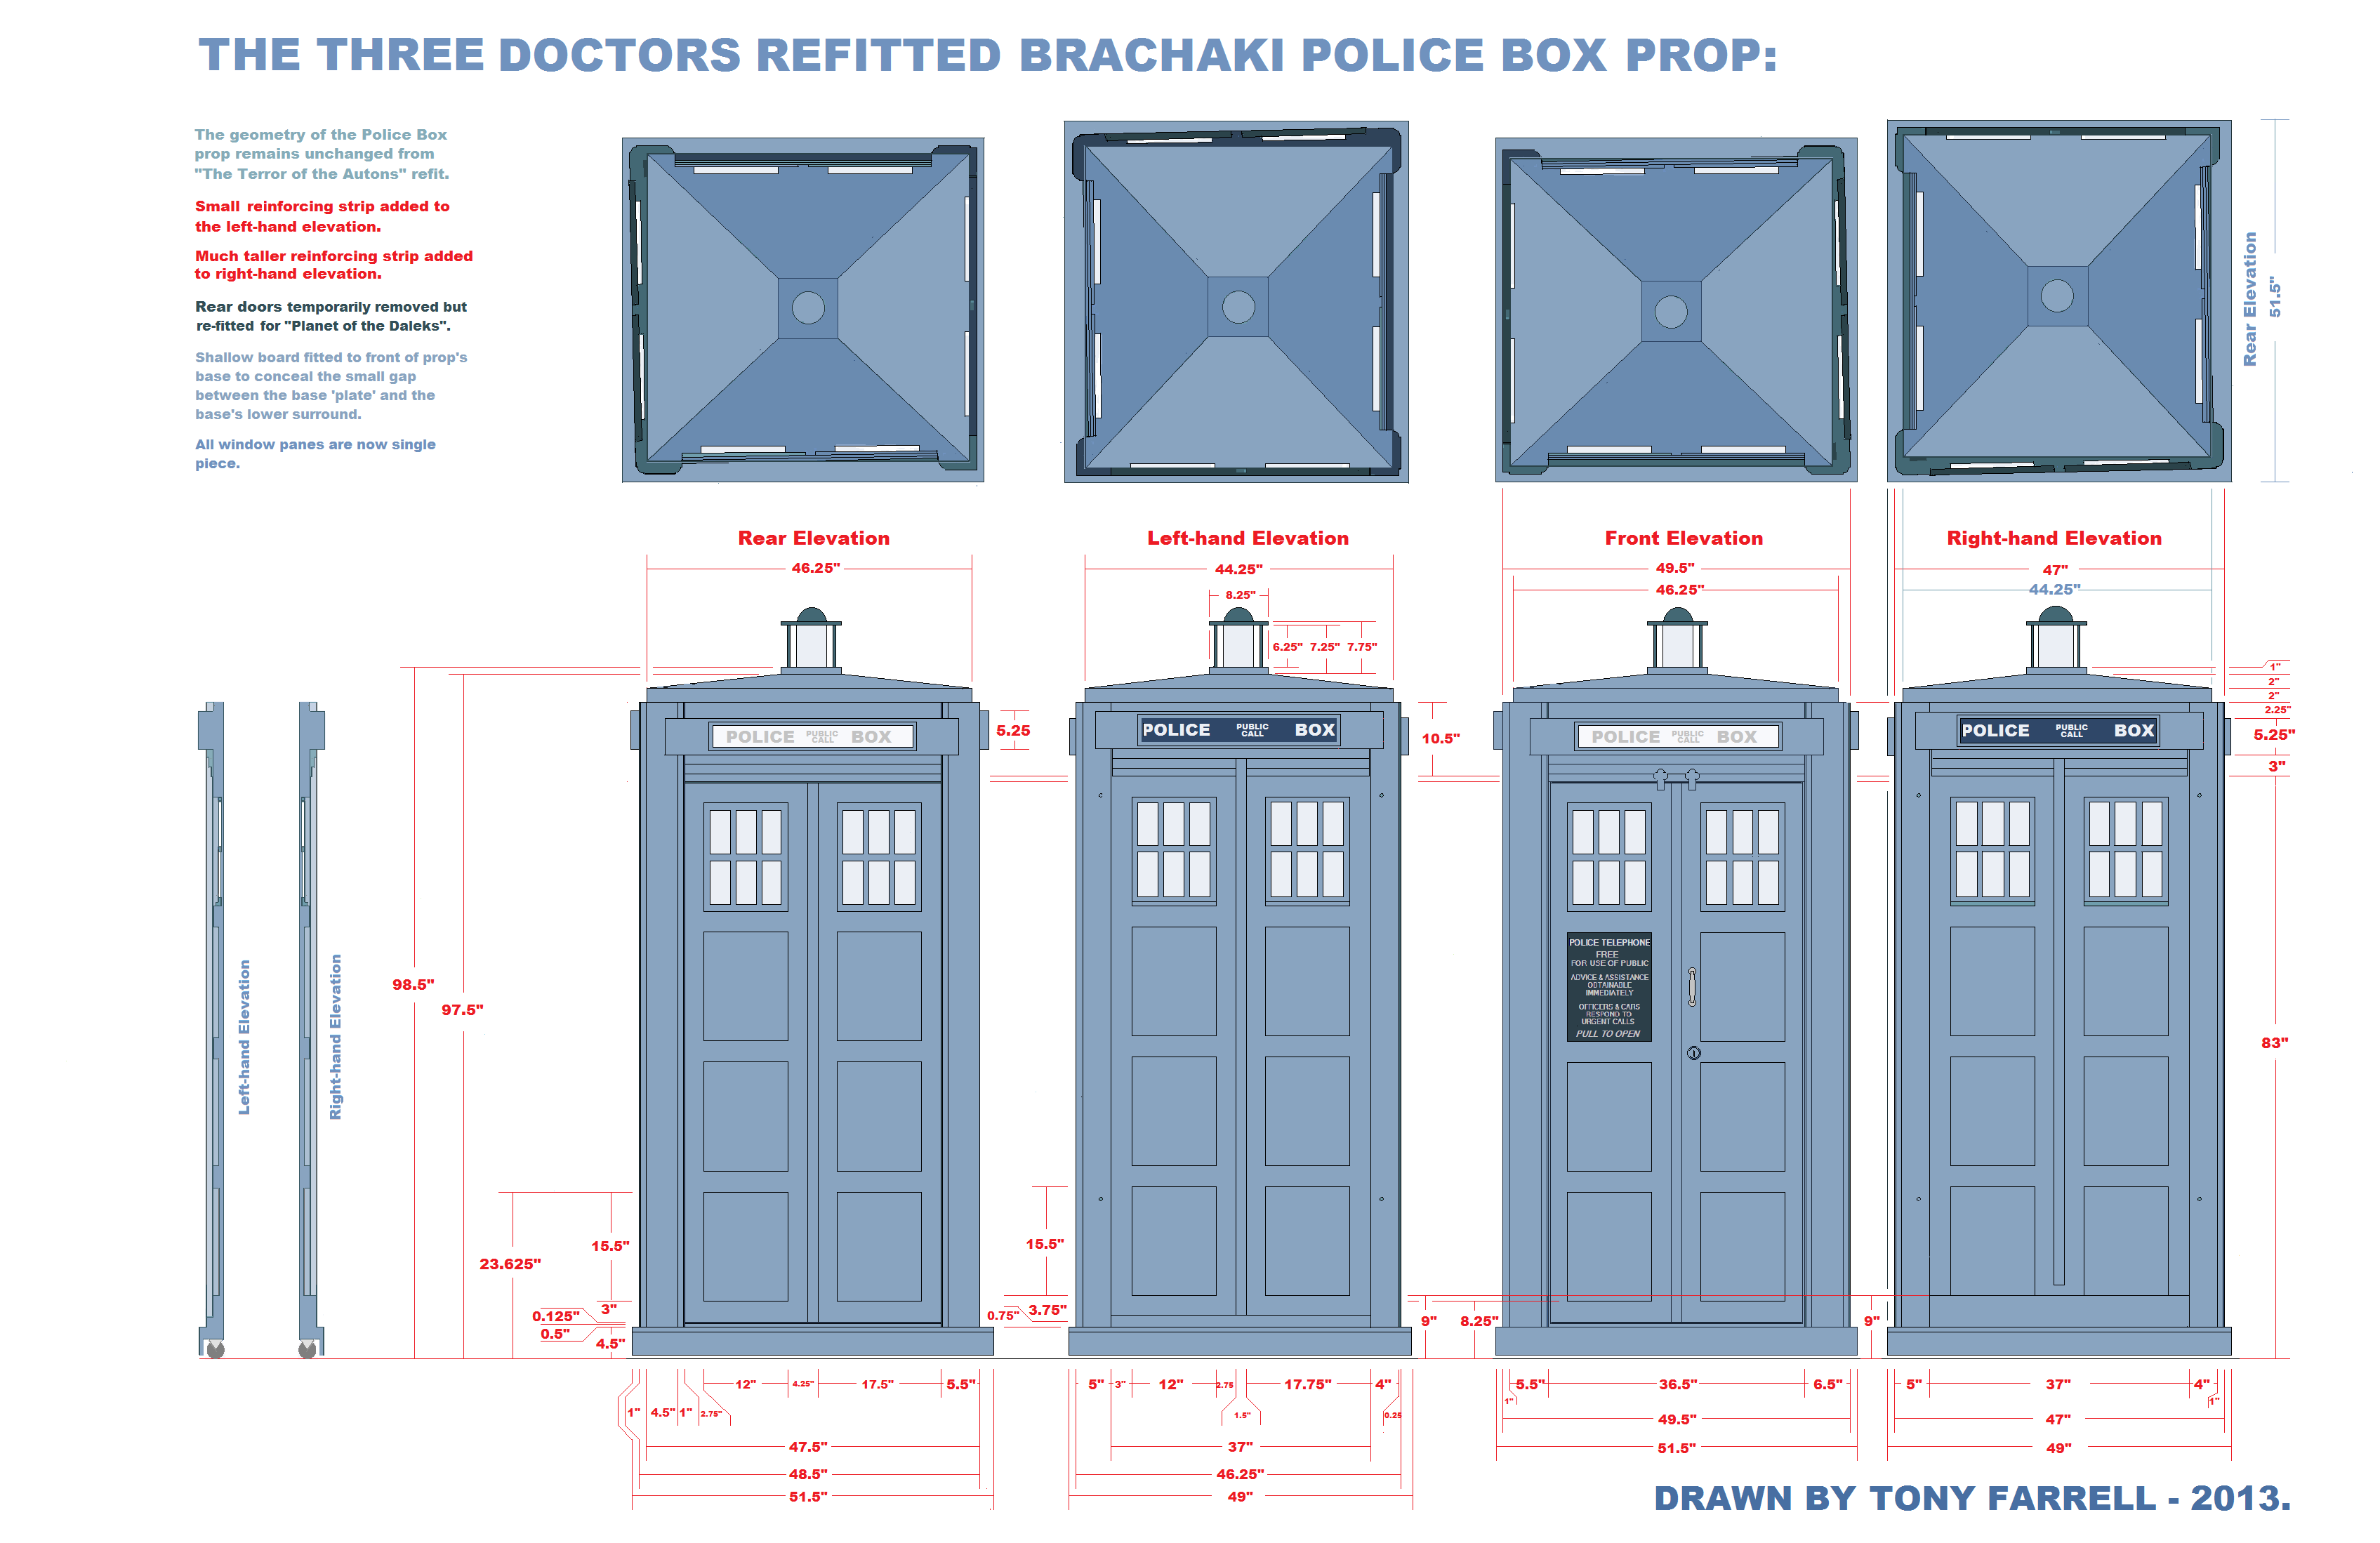 Brachaki_refitted_box_all_sides_3 doctors.png